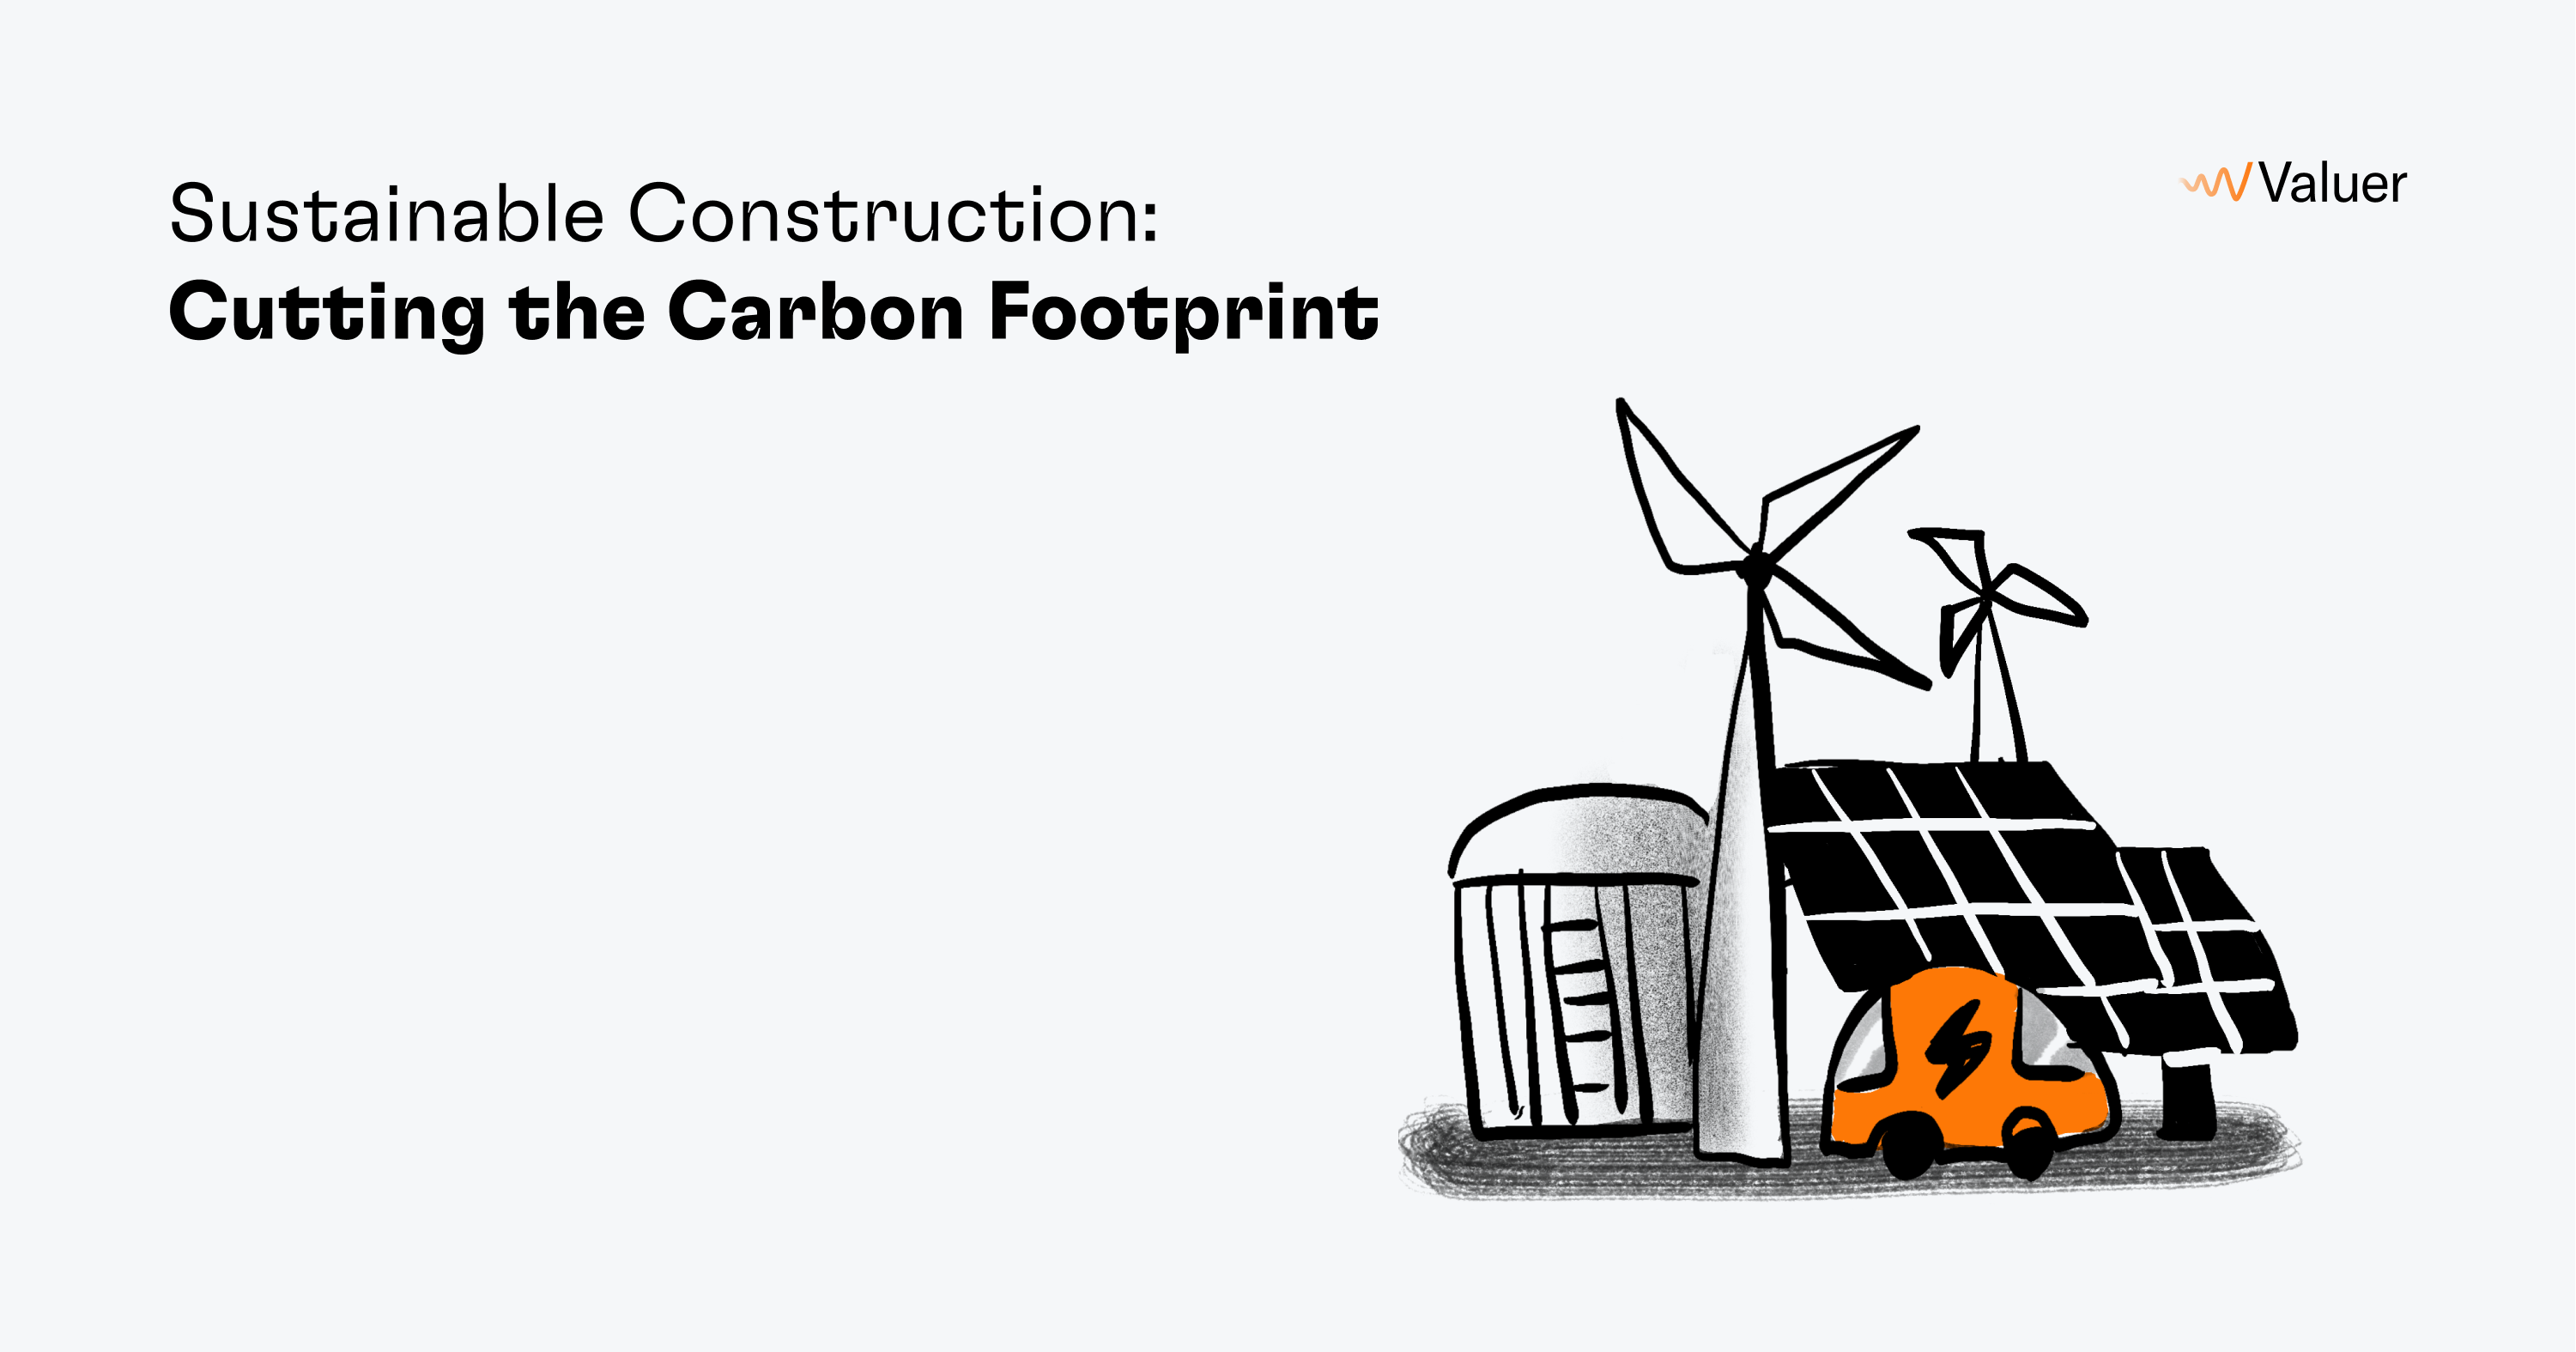 Sustainable Construction and Cutting the Carbon Footprint